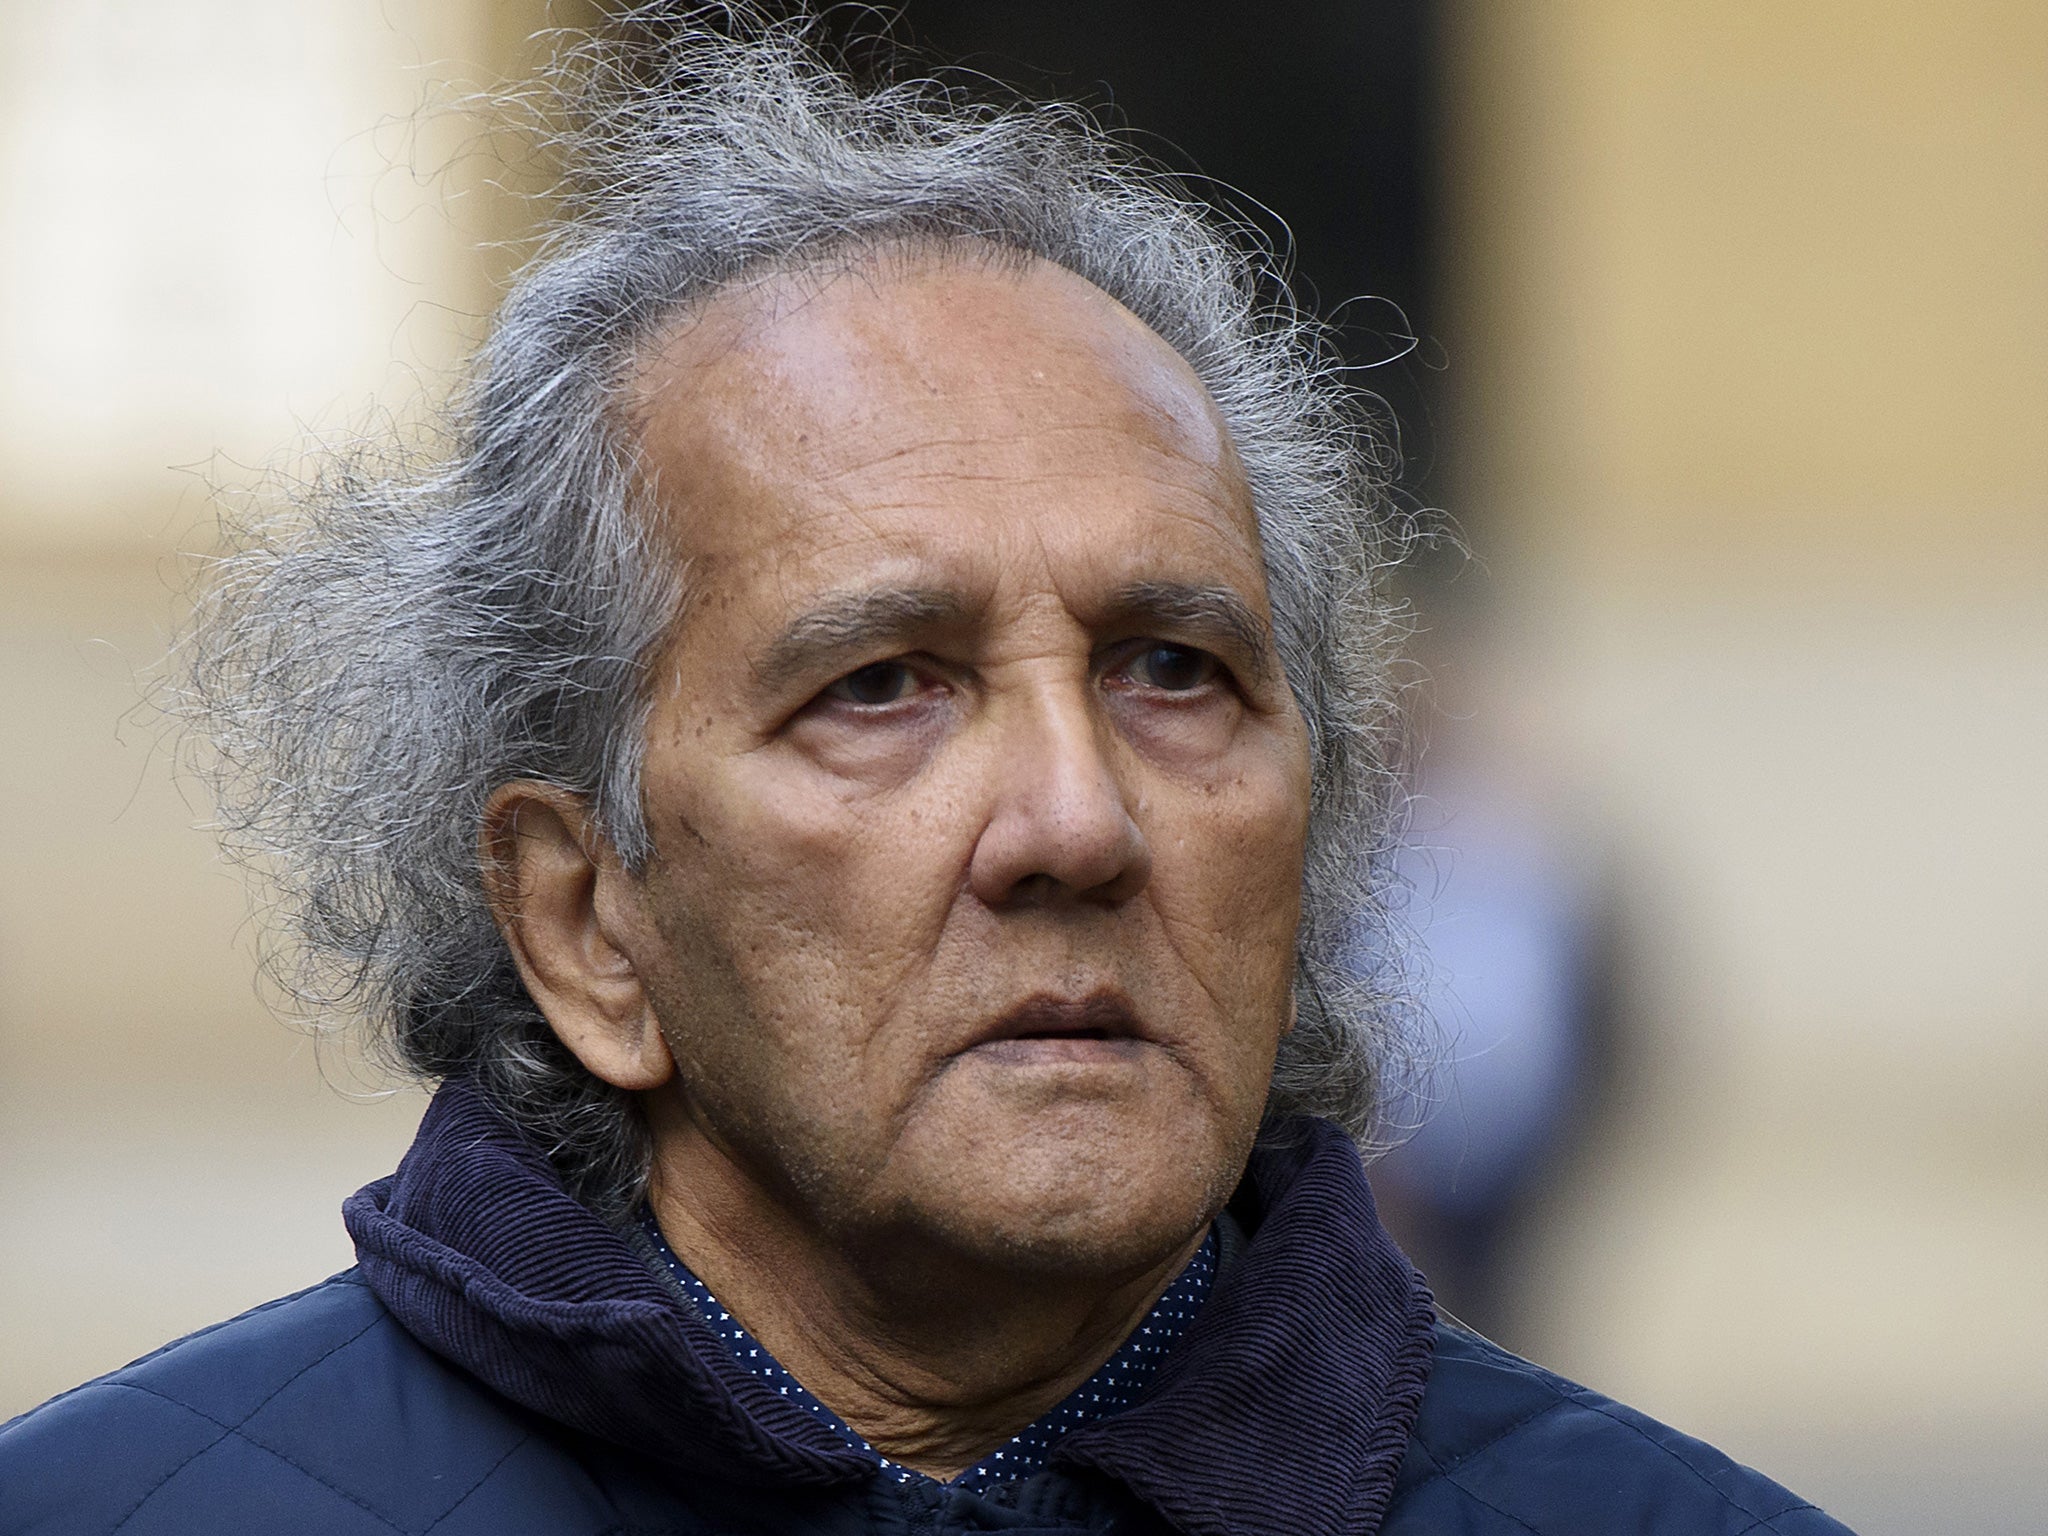 The Maoist cult leader has been found guilty of a number of offences at Southwark Crown Court today